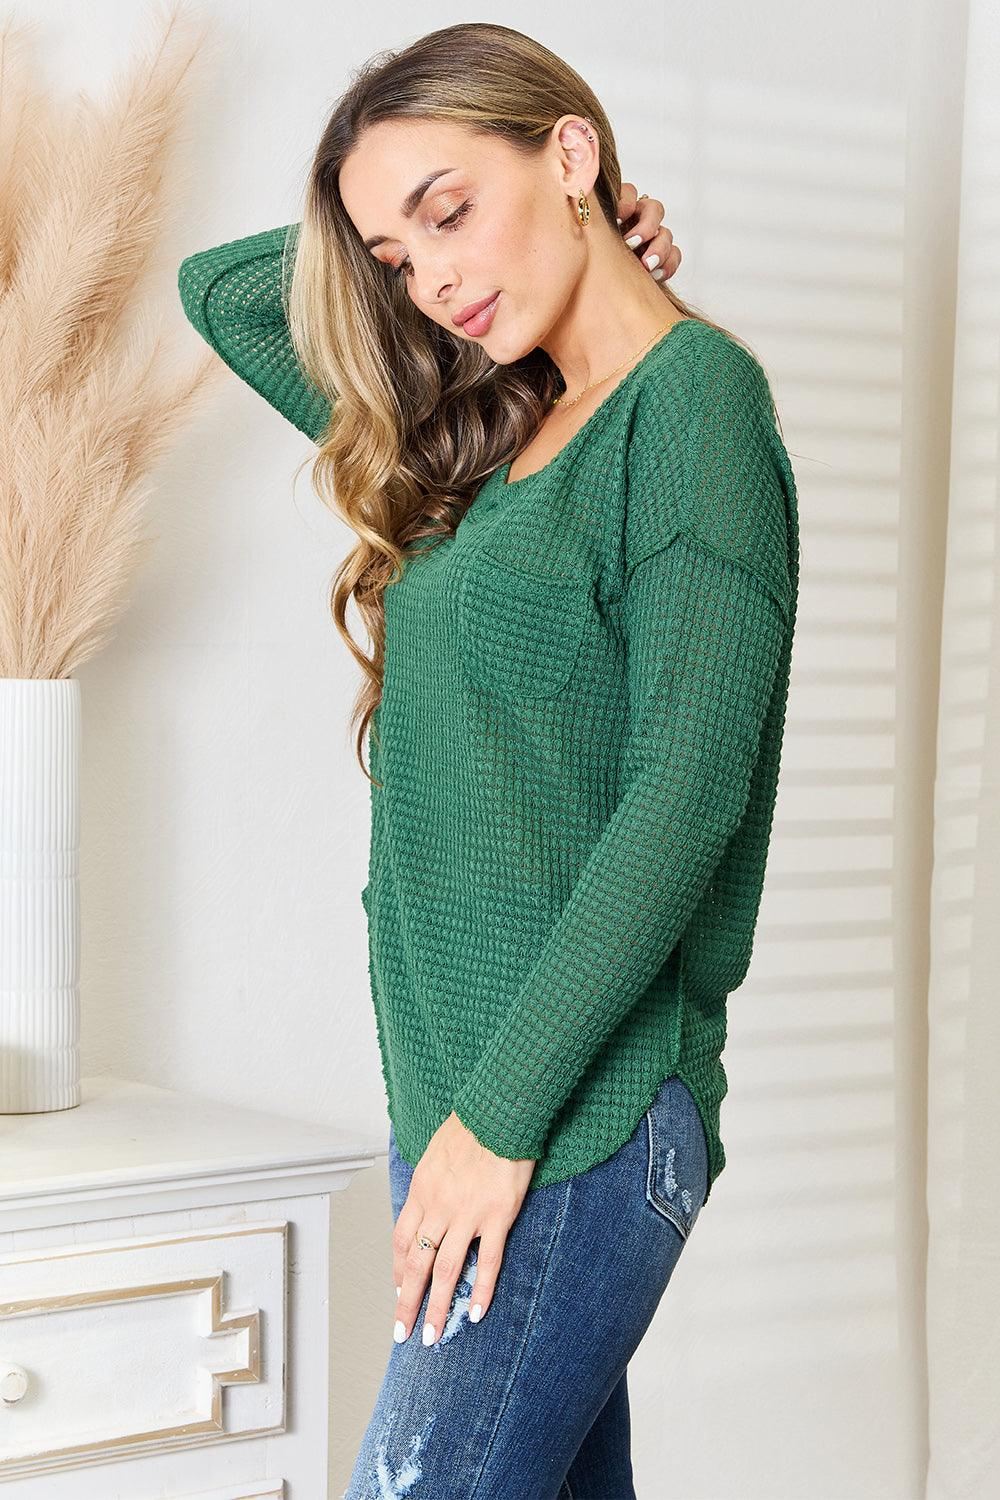 Womens Waffle Knit Top - Inspired Eye Boutique